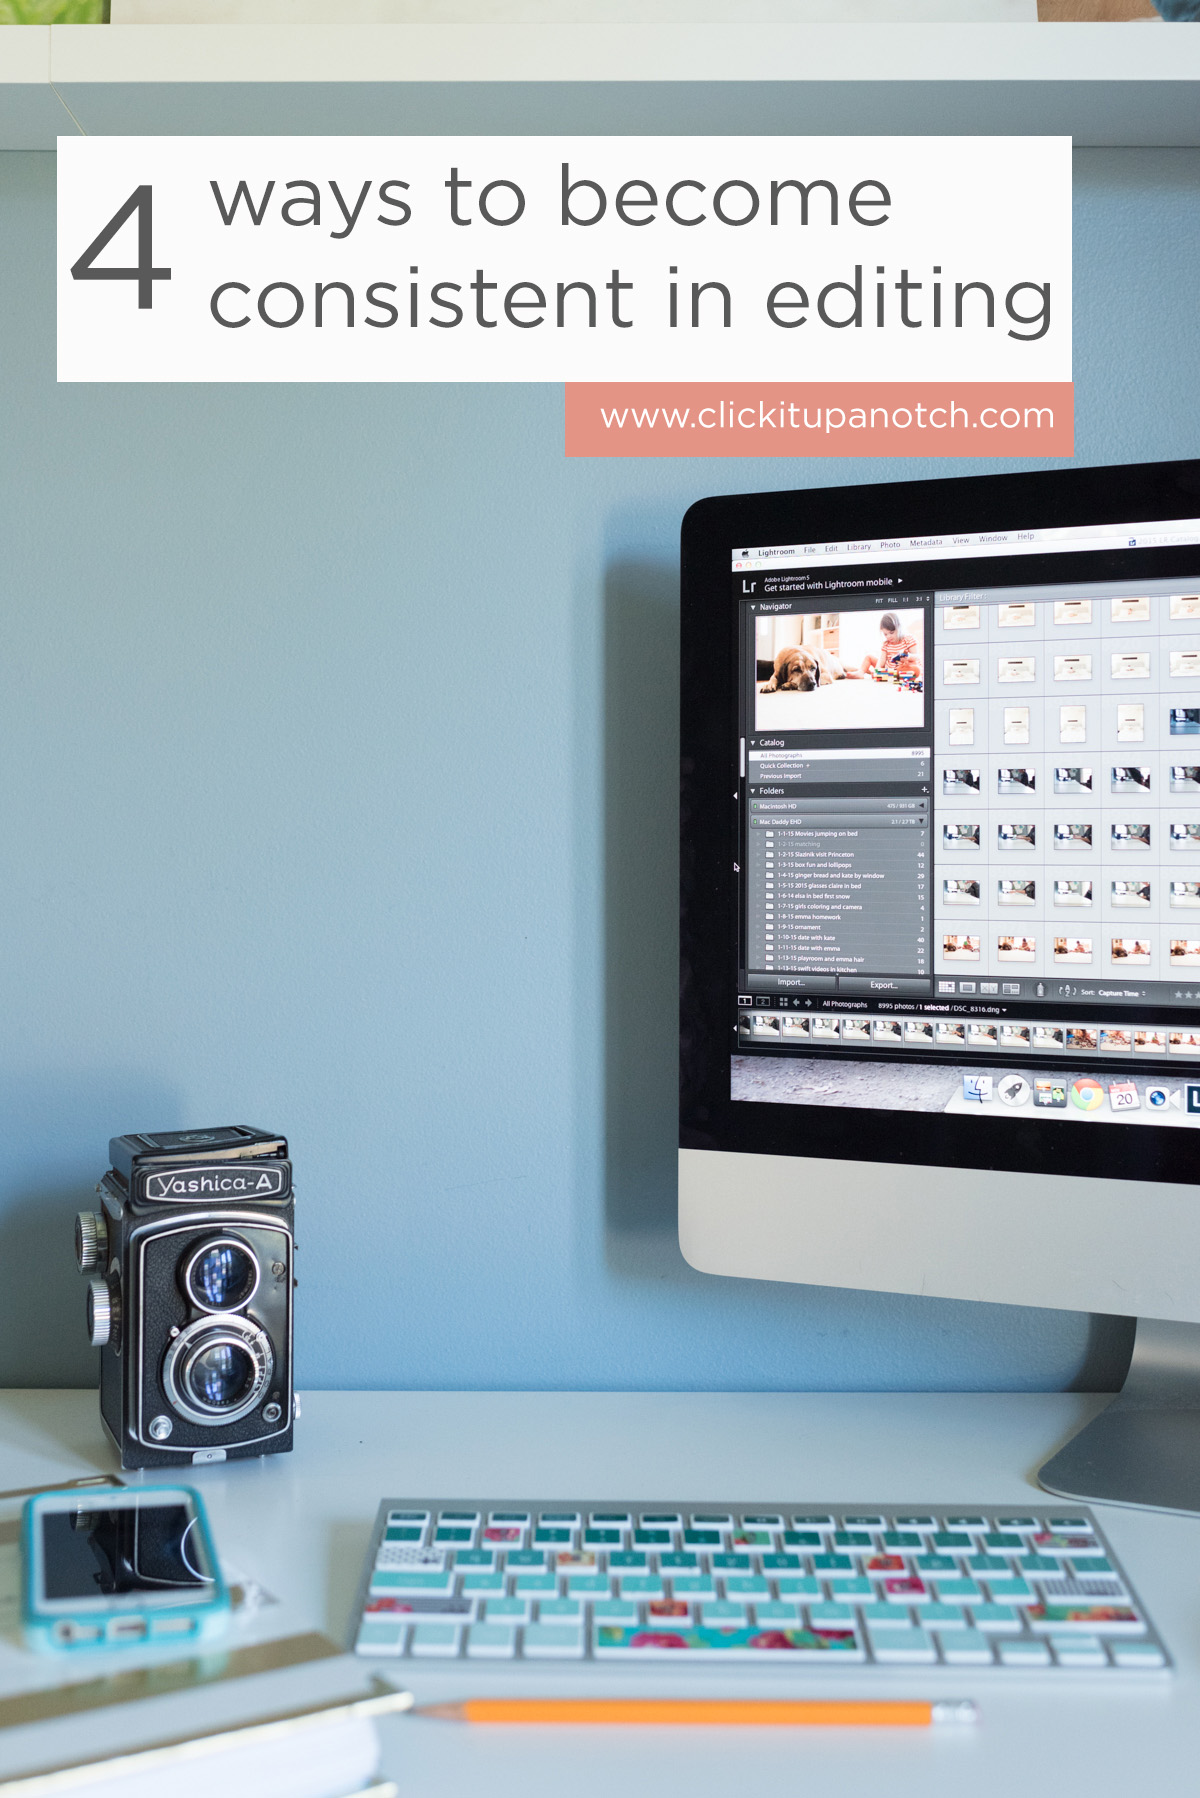 Use these 4 easy tips to become more consistent with your photo editing. Time to find your style!